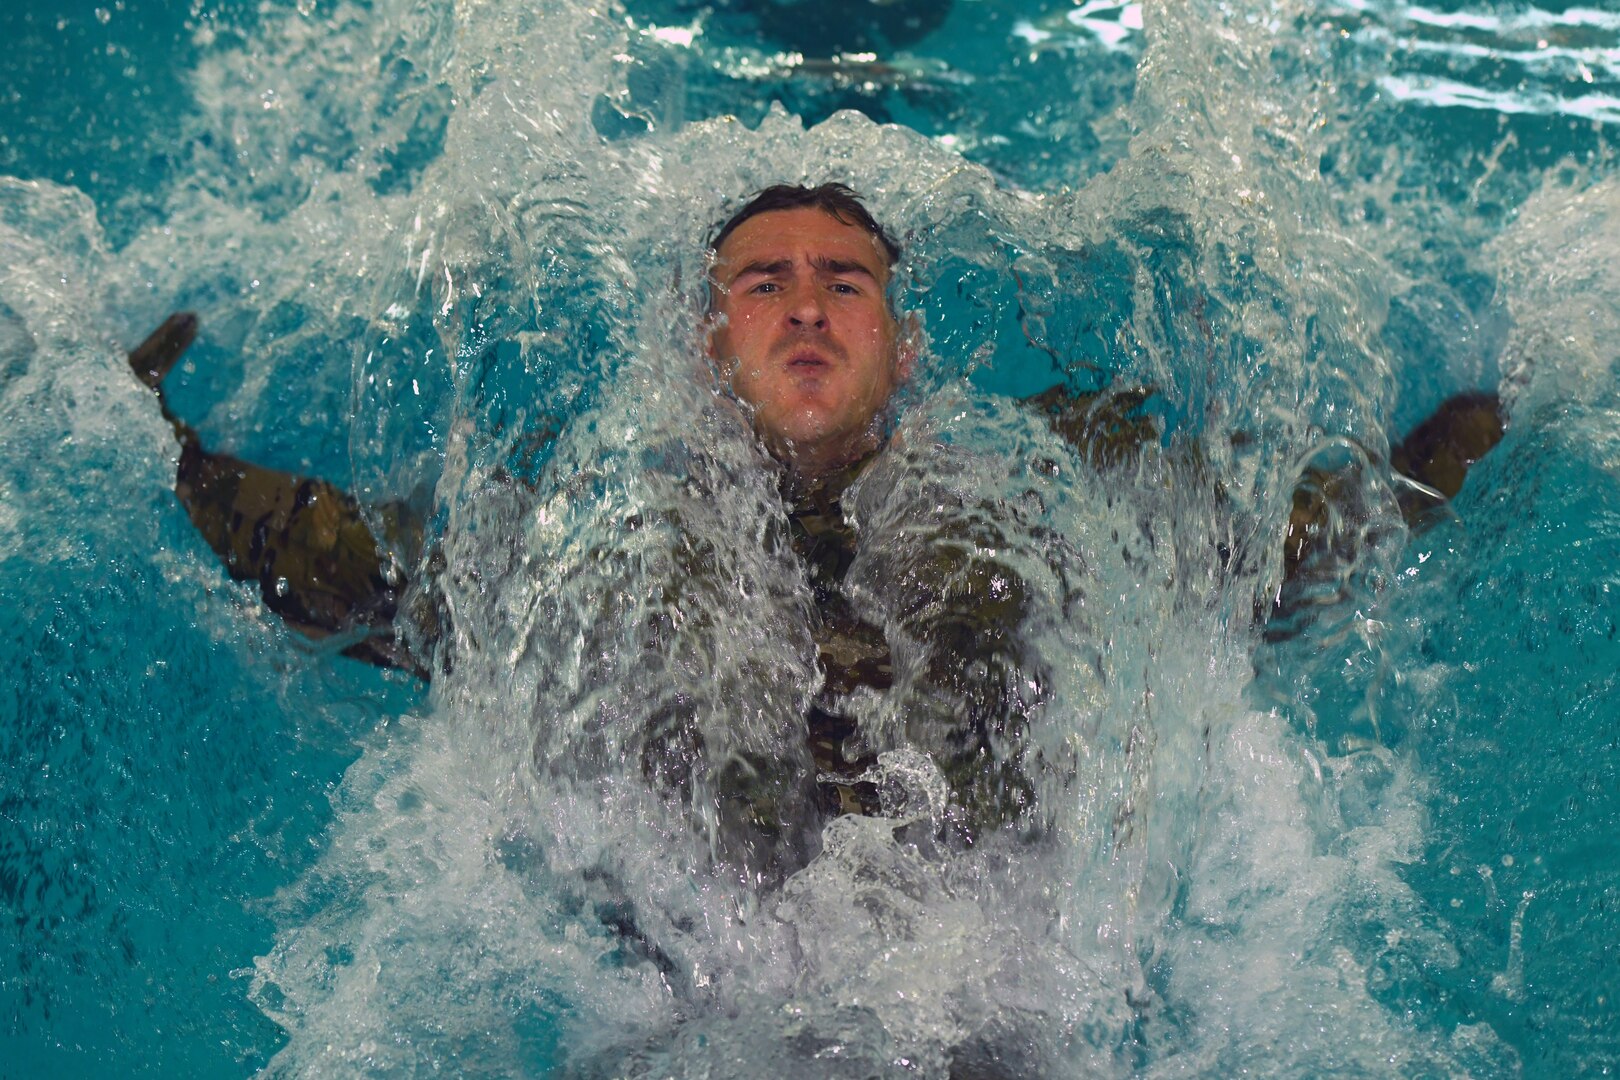 Spc. Wyatt Walls, a fire support specialist with the Oregon Army National Guard’s 2nd Battalion, 218th Field Artillery Regiment, performs a butterfly kick in a lap pool at the Middle Tennessee State University Aquatic Recreation Center in Murfreesboro, Tennessee, during the 2022 Army National Guard Best Warrior Competition July 25, 2022.